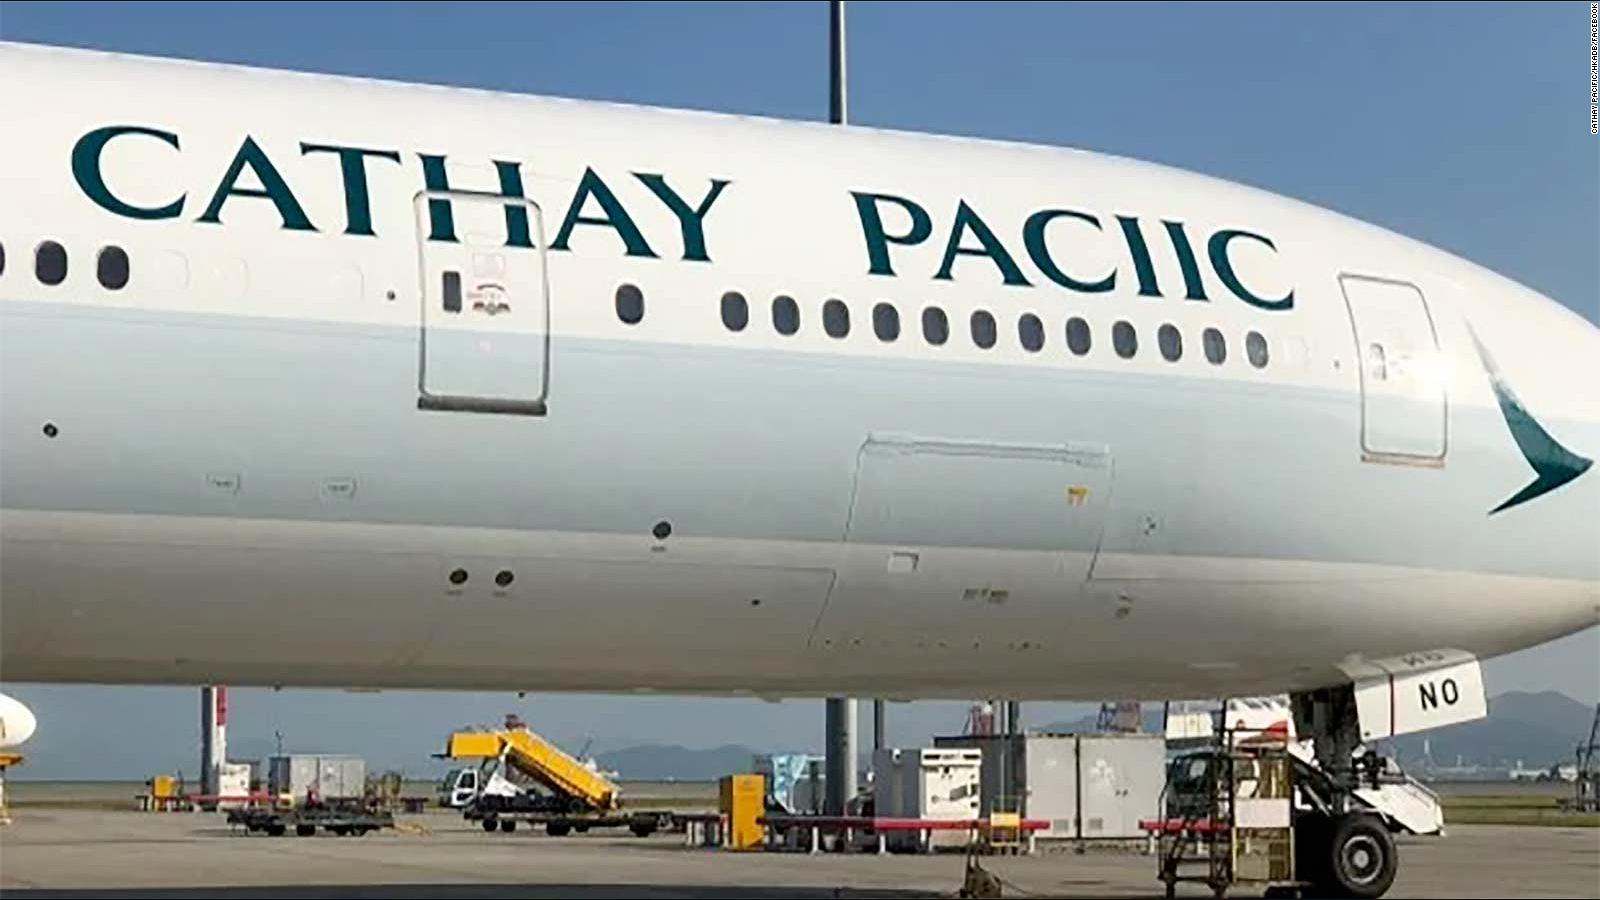 Pacific cathay Cathay Pacific